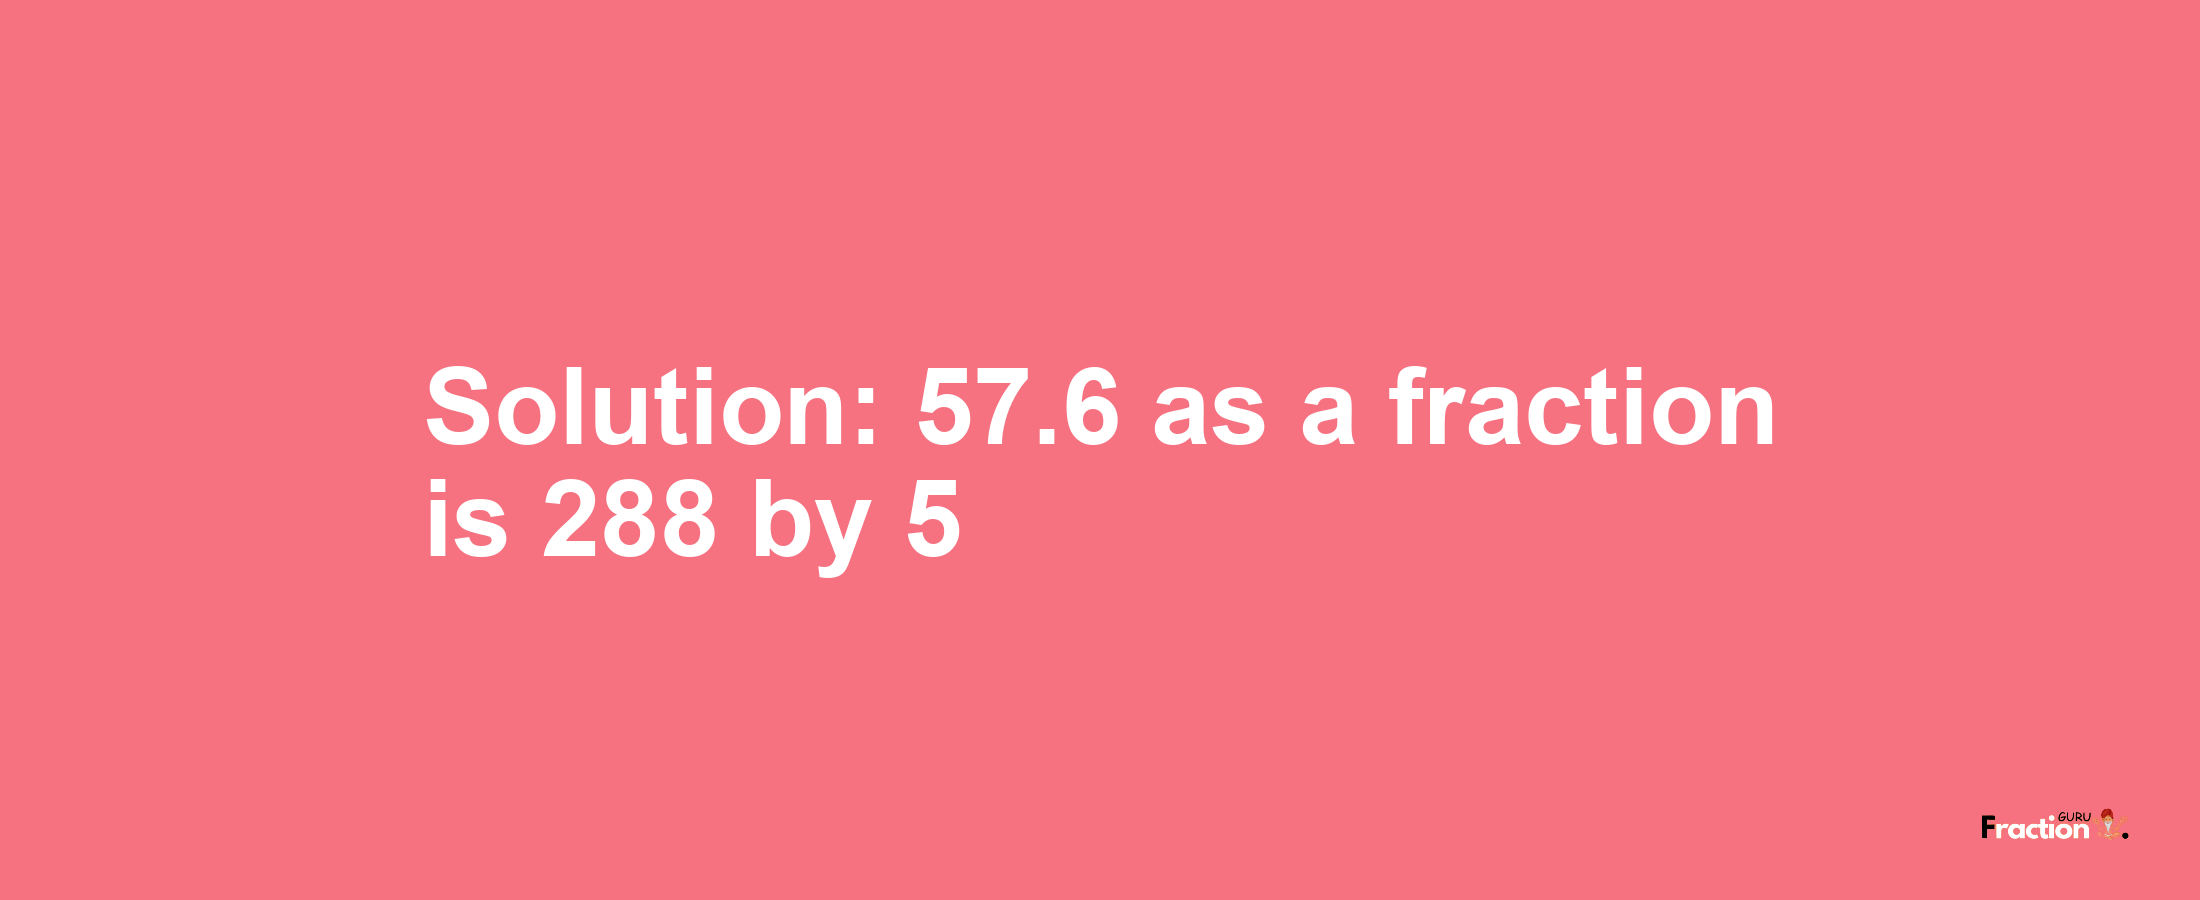 Solution:57.6 as a fraction is 288/5